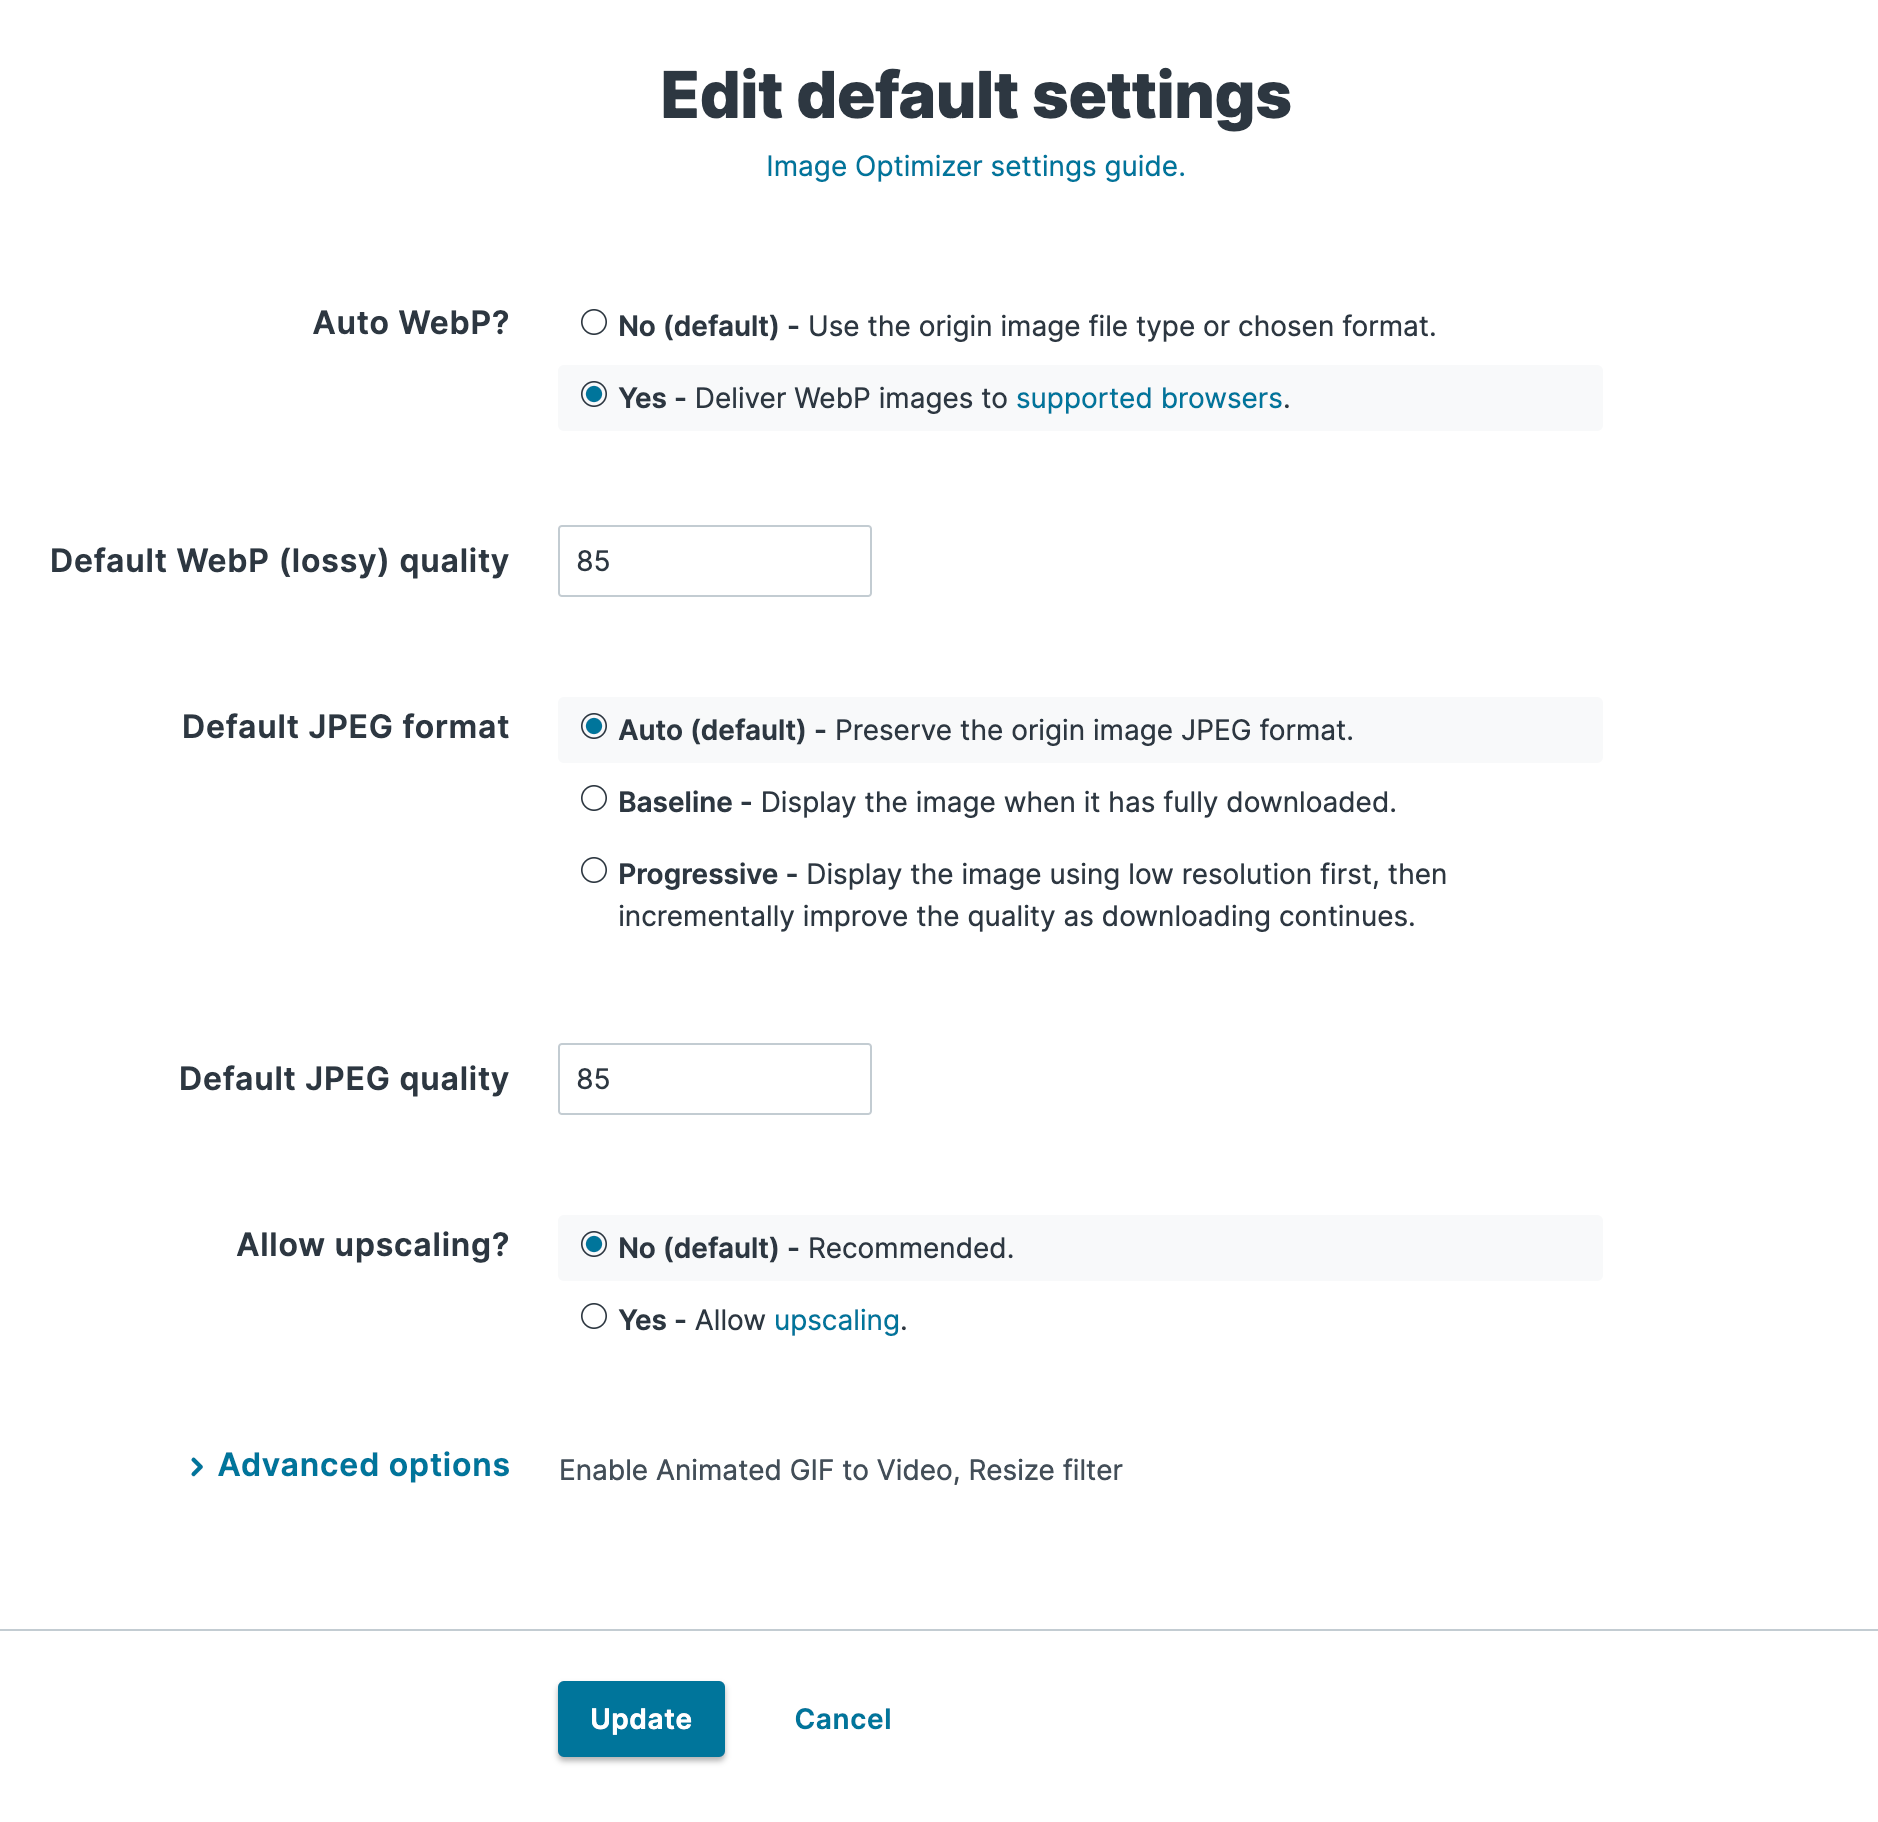 Editing the Fastly IO default settings